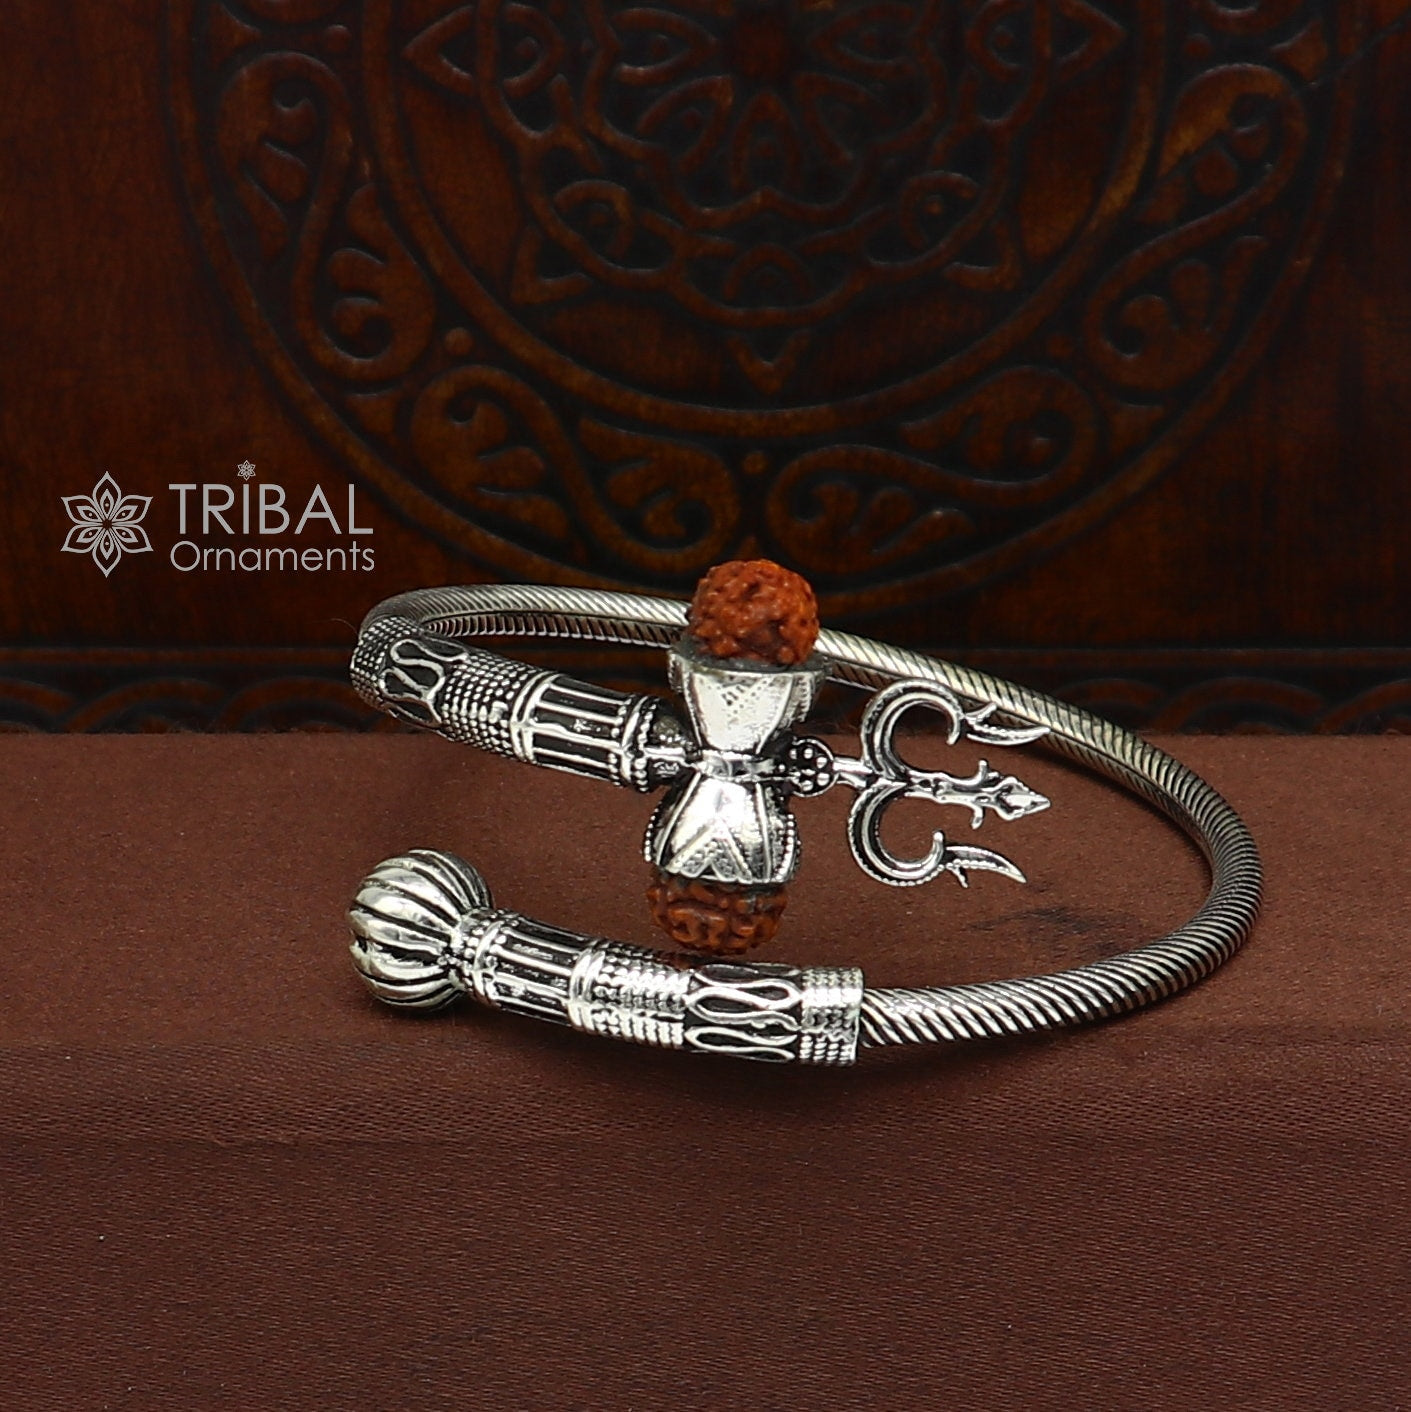 925 sterling silver handmade amazing customized lord shiva bangle bracelet, excellent trident trishul with rudraksha unisex jewelry nsk773 - TRIBAL ORNAMENTS